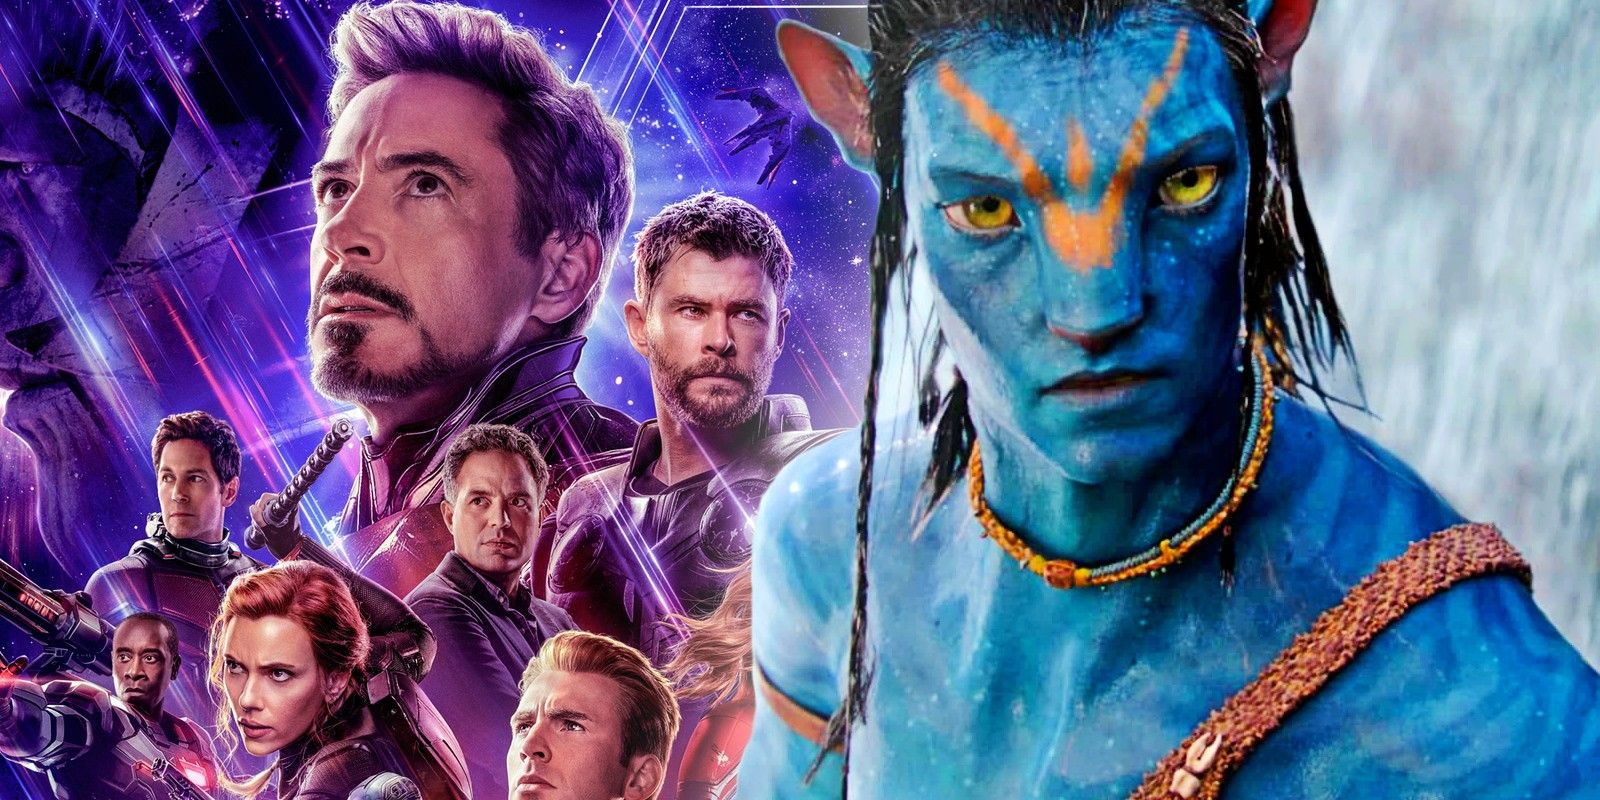 Avatar 2 box office  how much money did it make